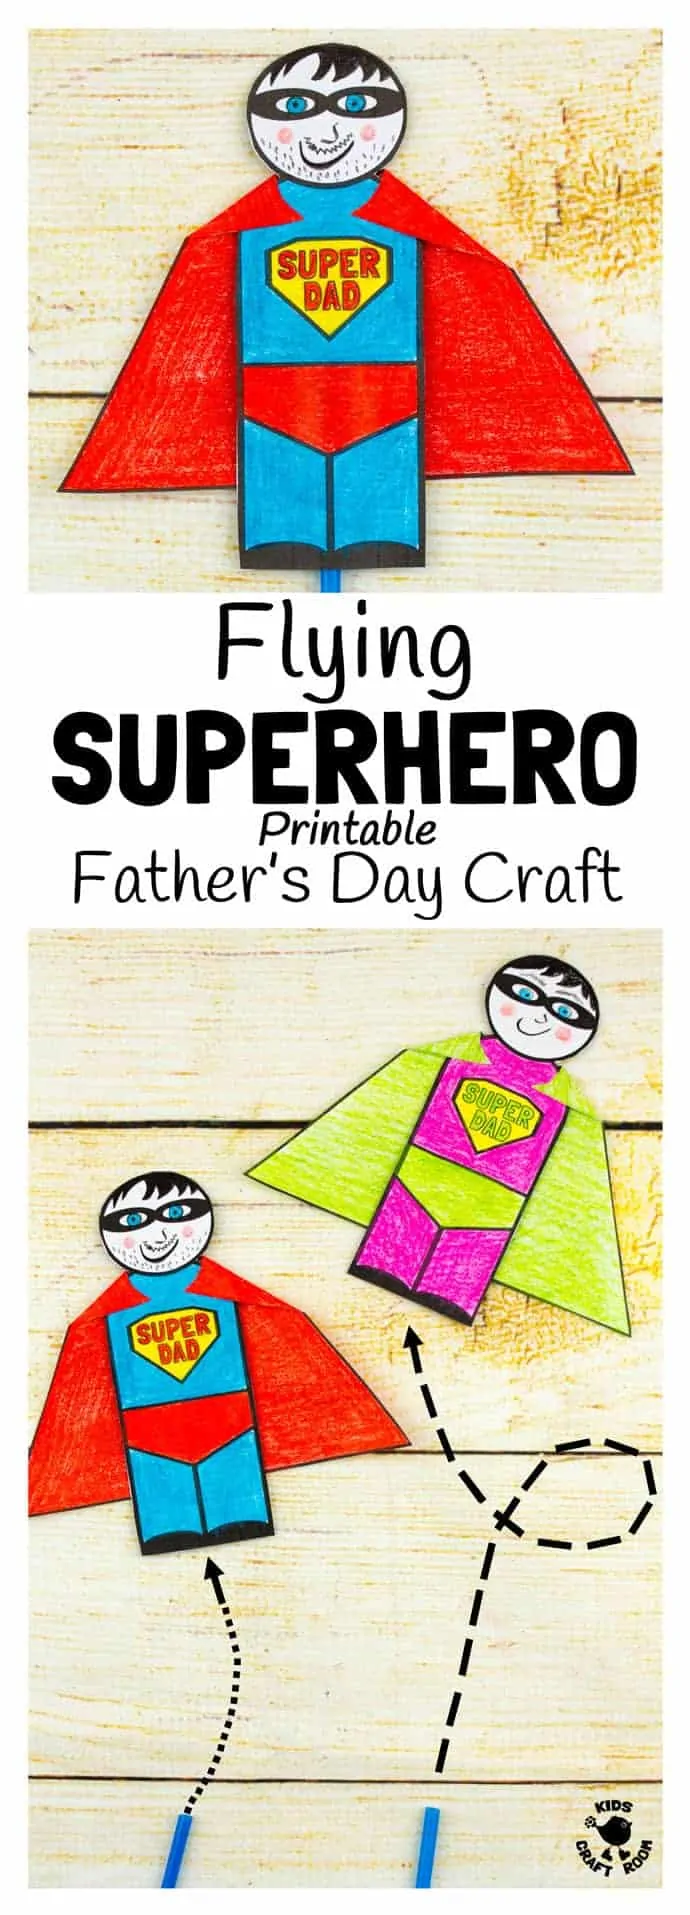 Flying Superhero - Father's Day Craft - pin image 1